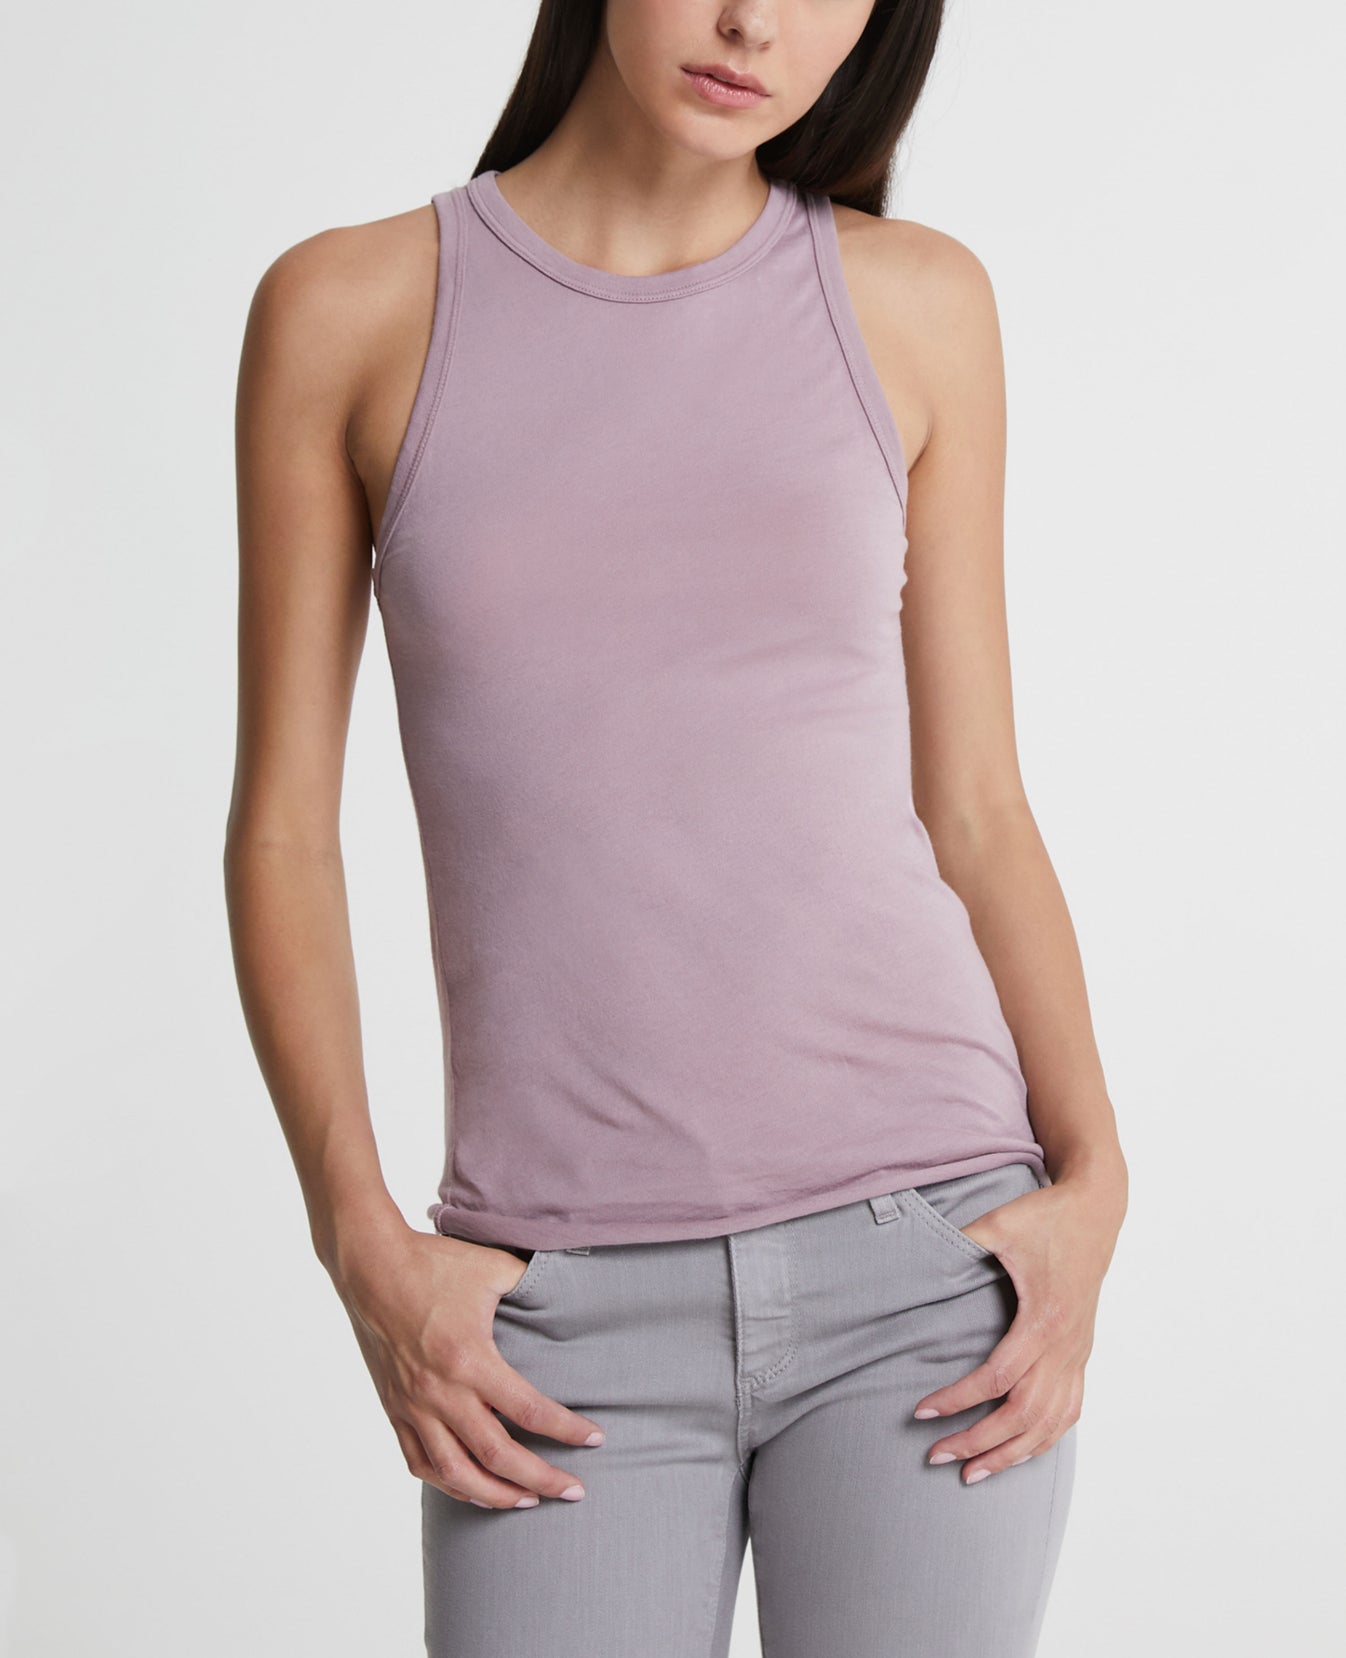 Lexi Tank Pale Wisteria Fitted Tank Women Tops Photo 1